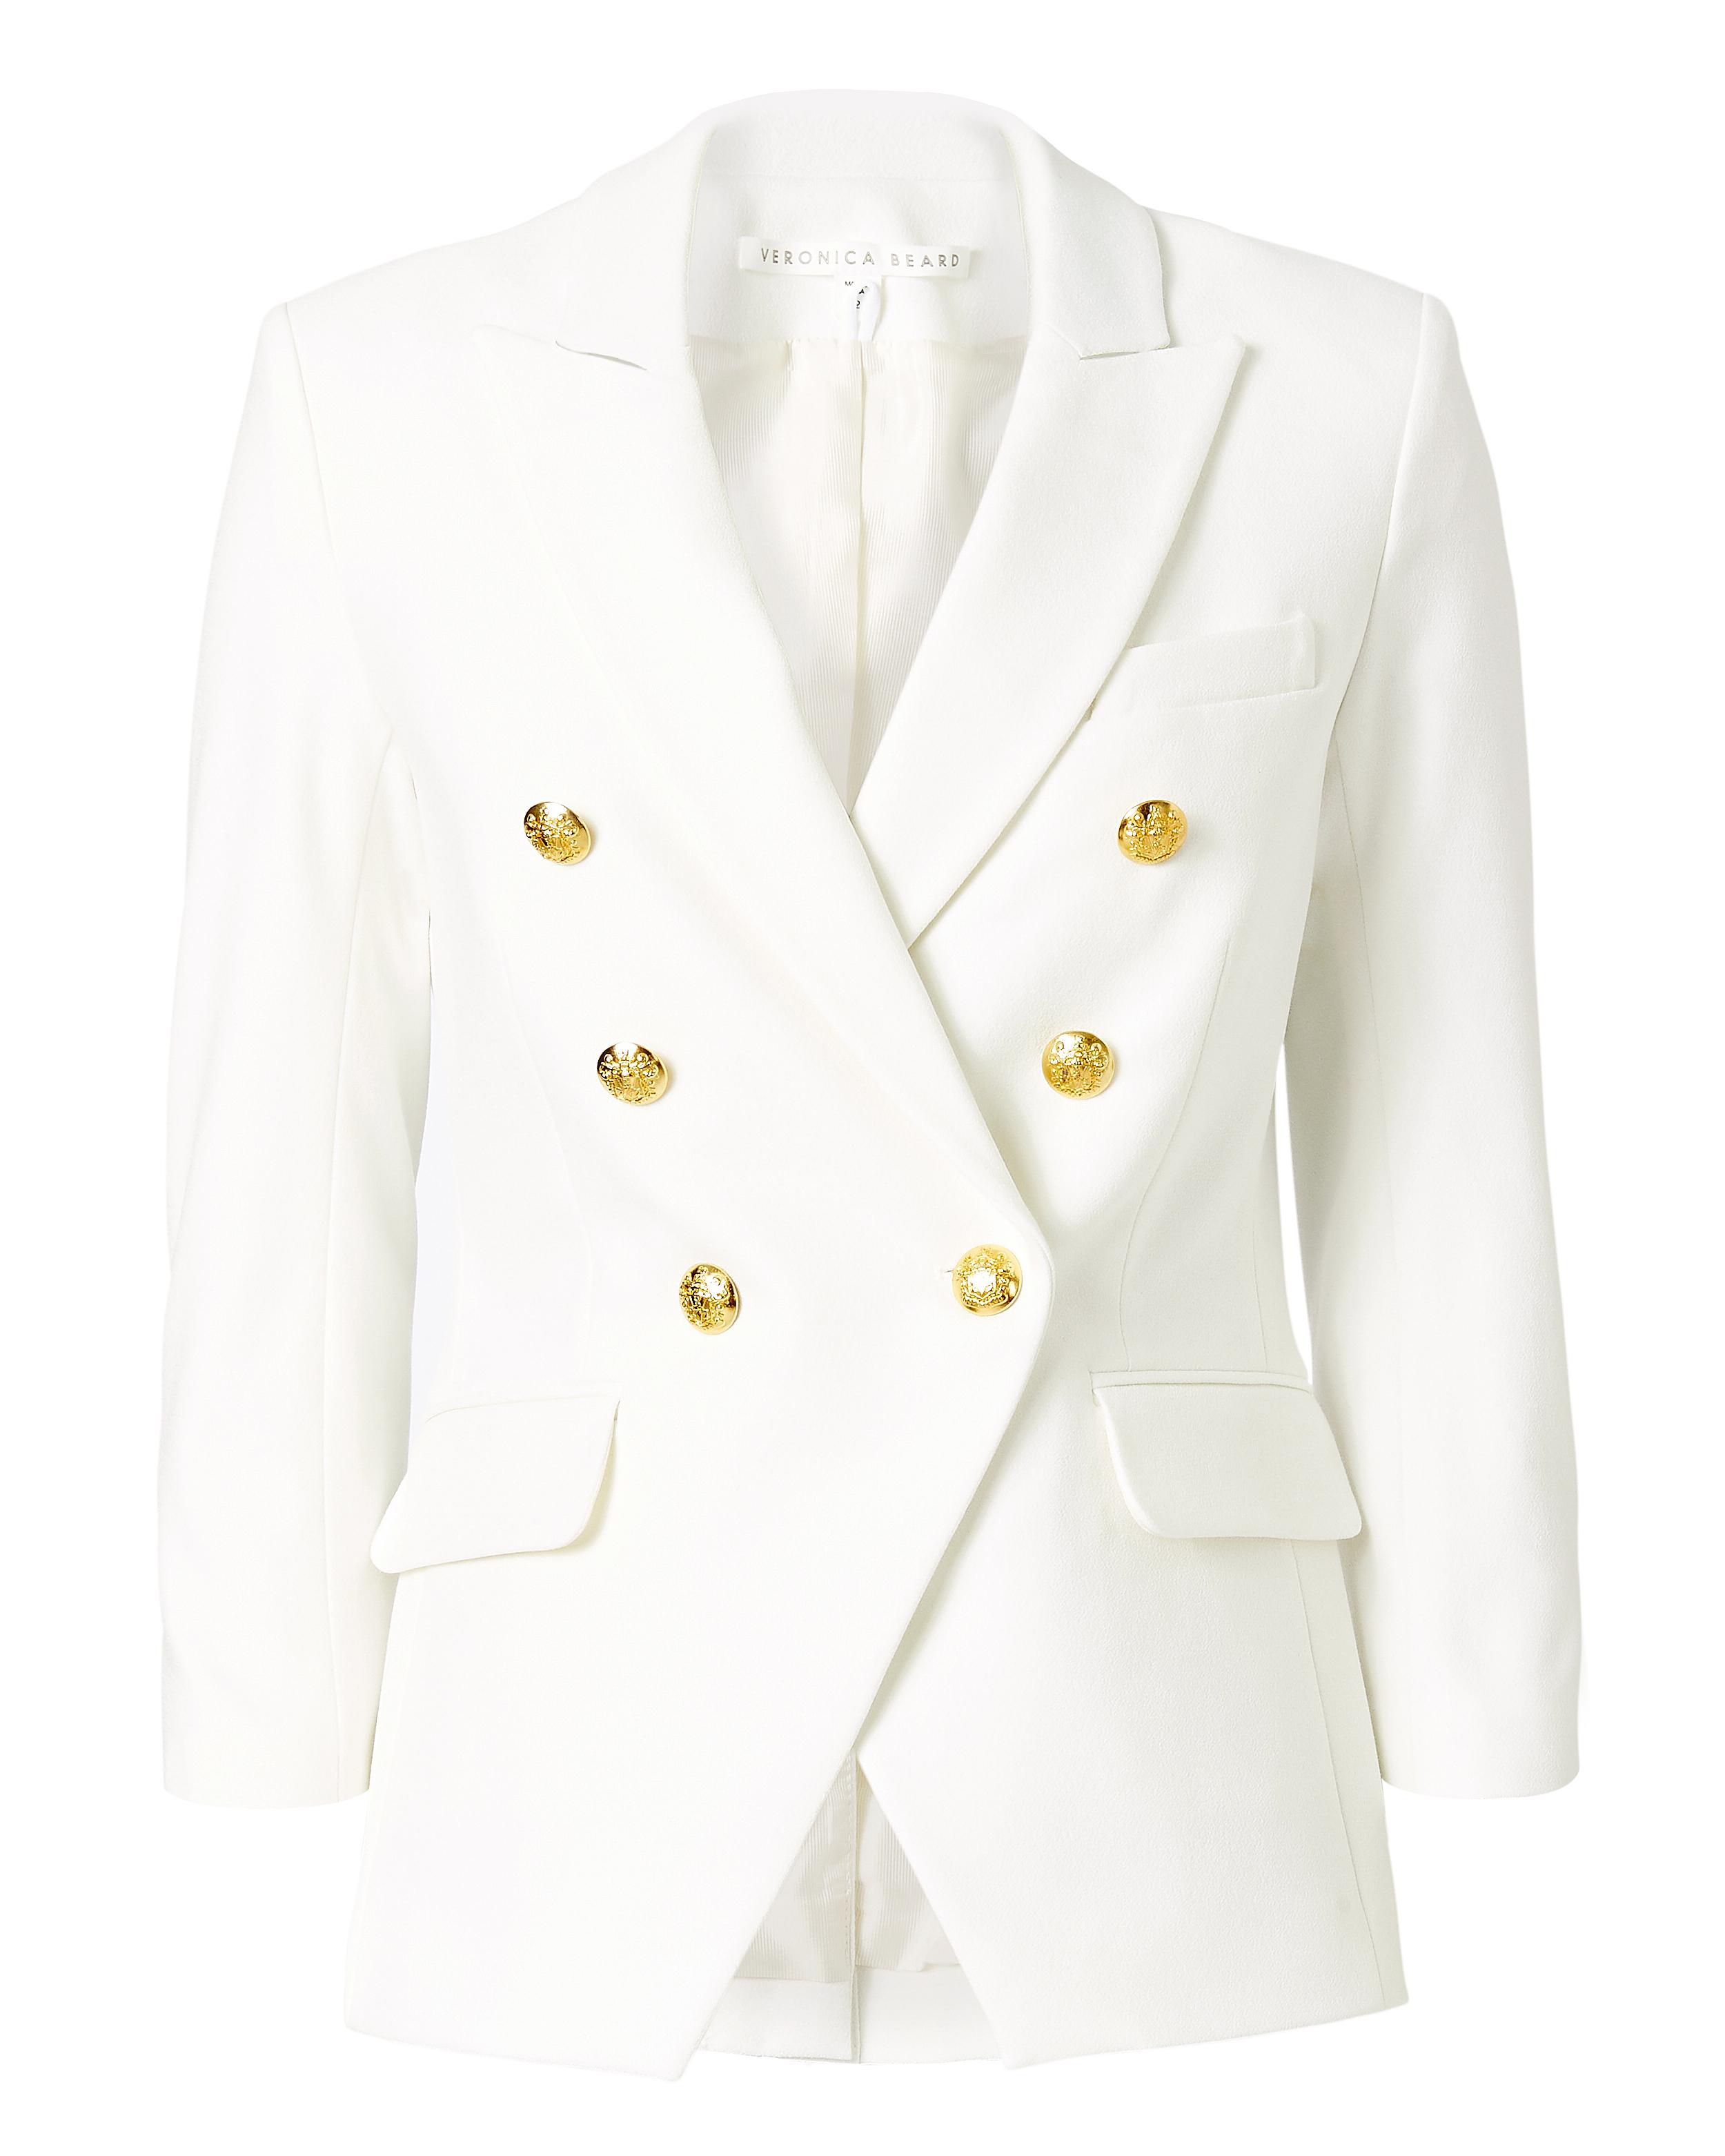 Veronica Beard Synthetic Empire Double-breasted Blazer in White - Lyst